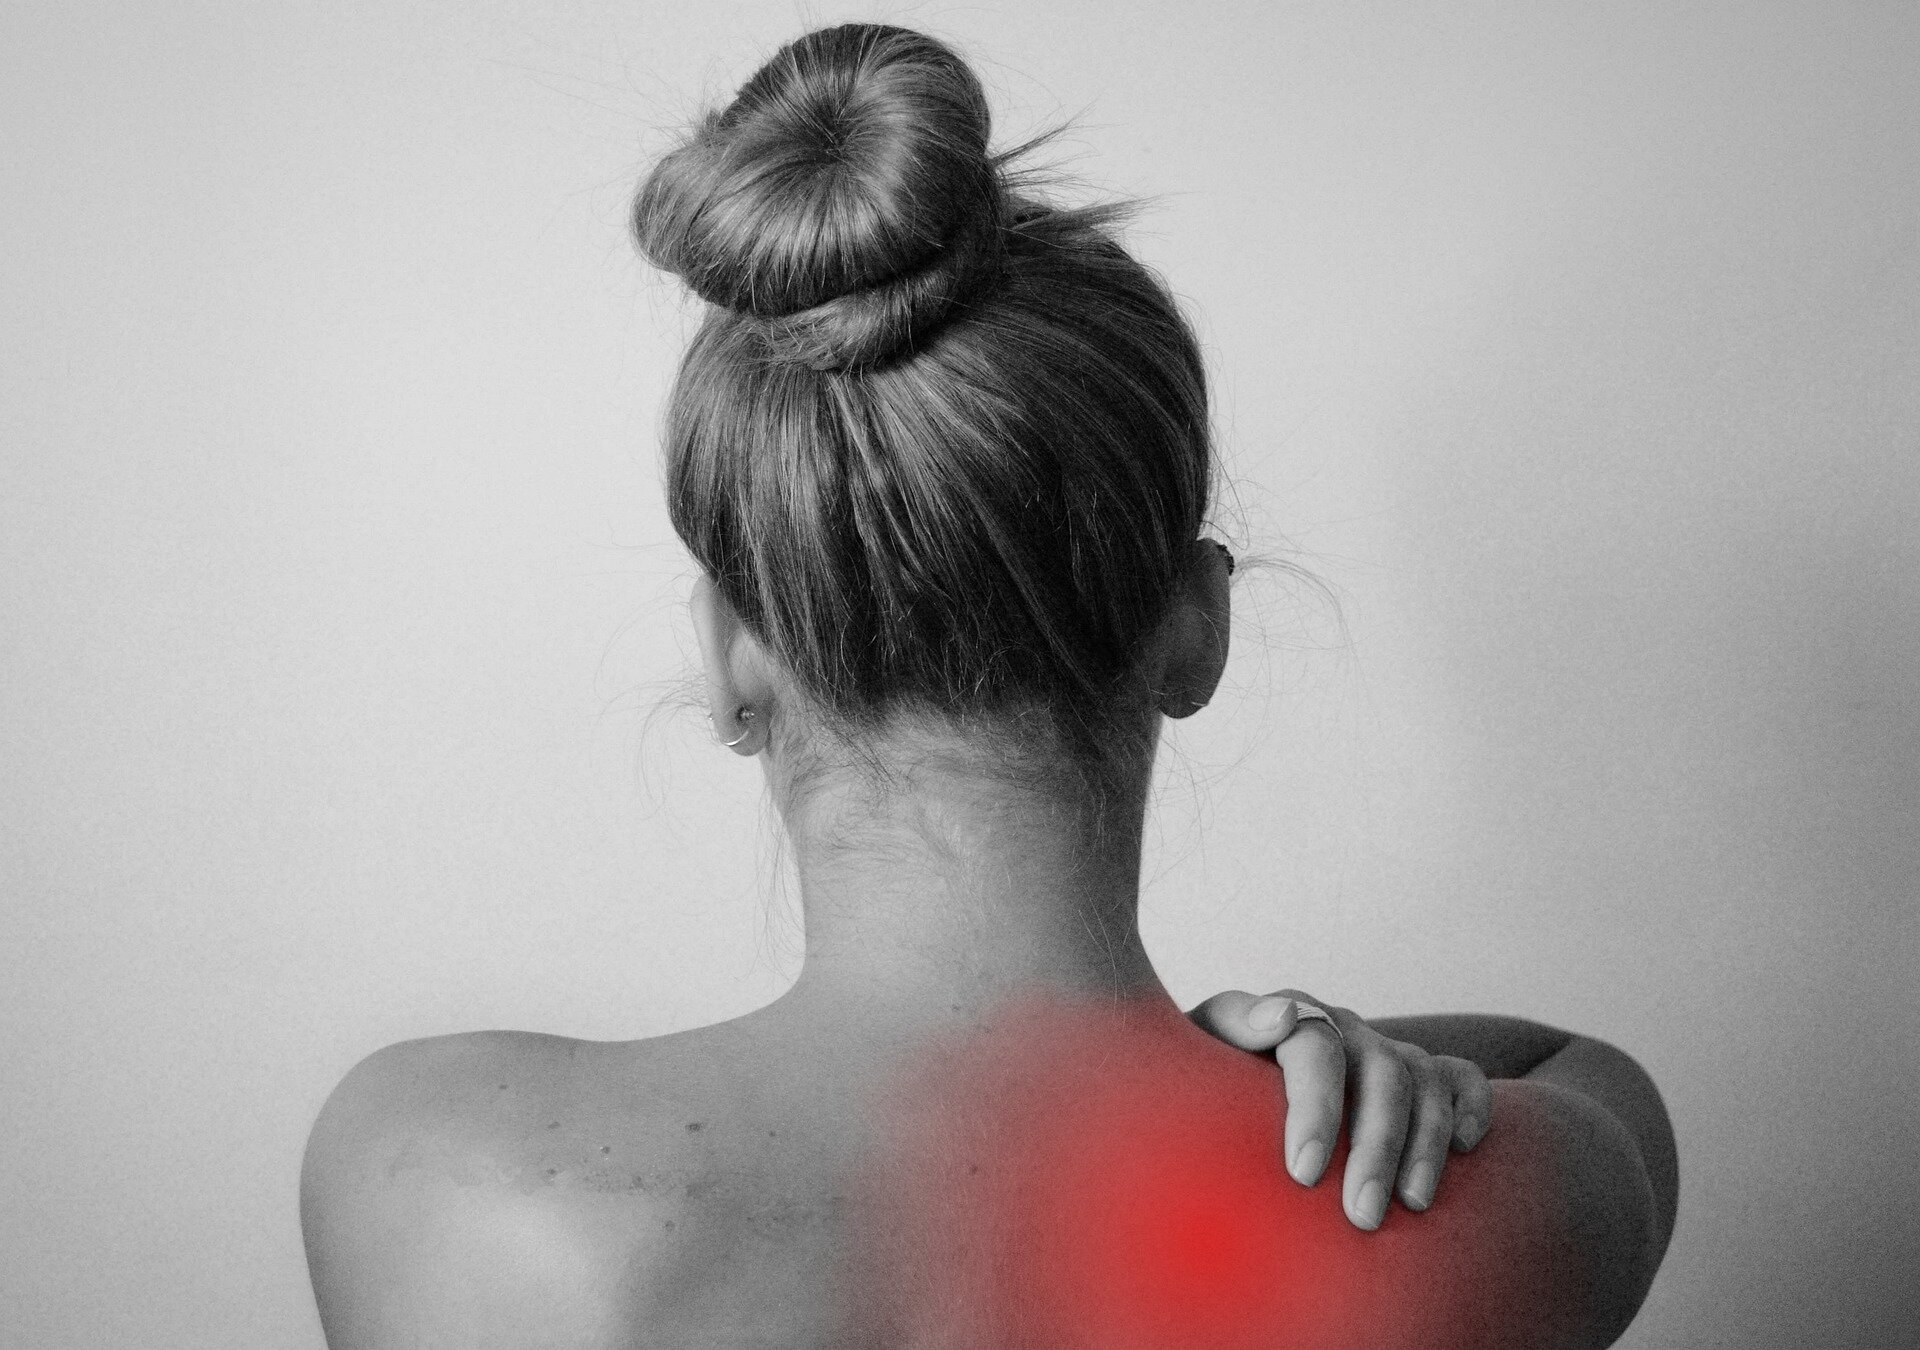 #No benefit of physiotherapy over general advice after dislocated shoulder: Clinical trial